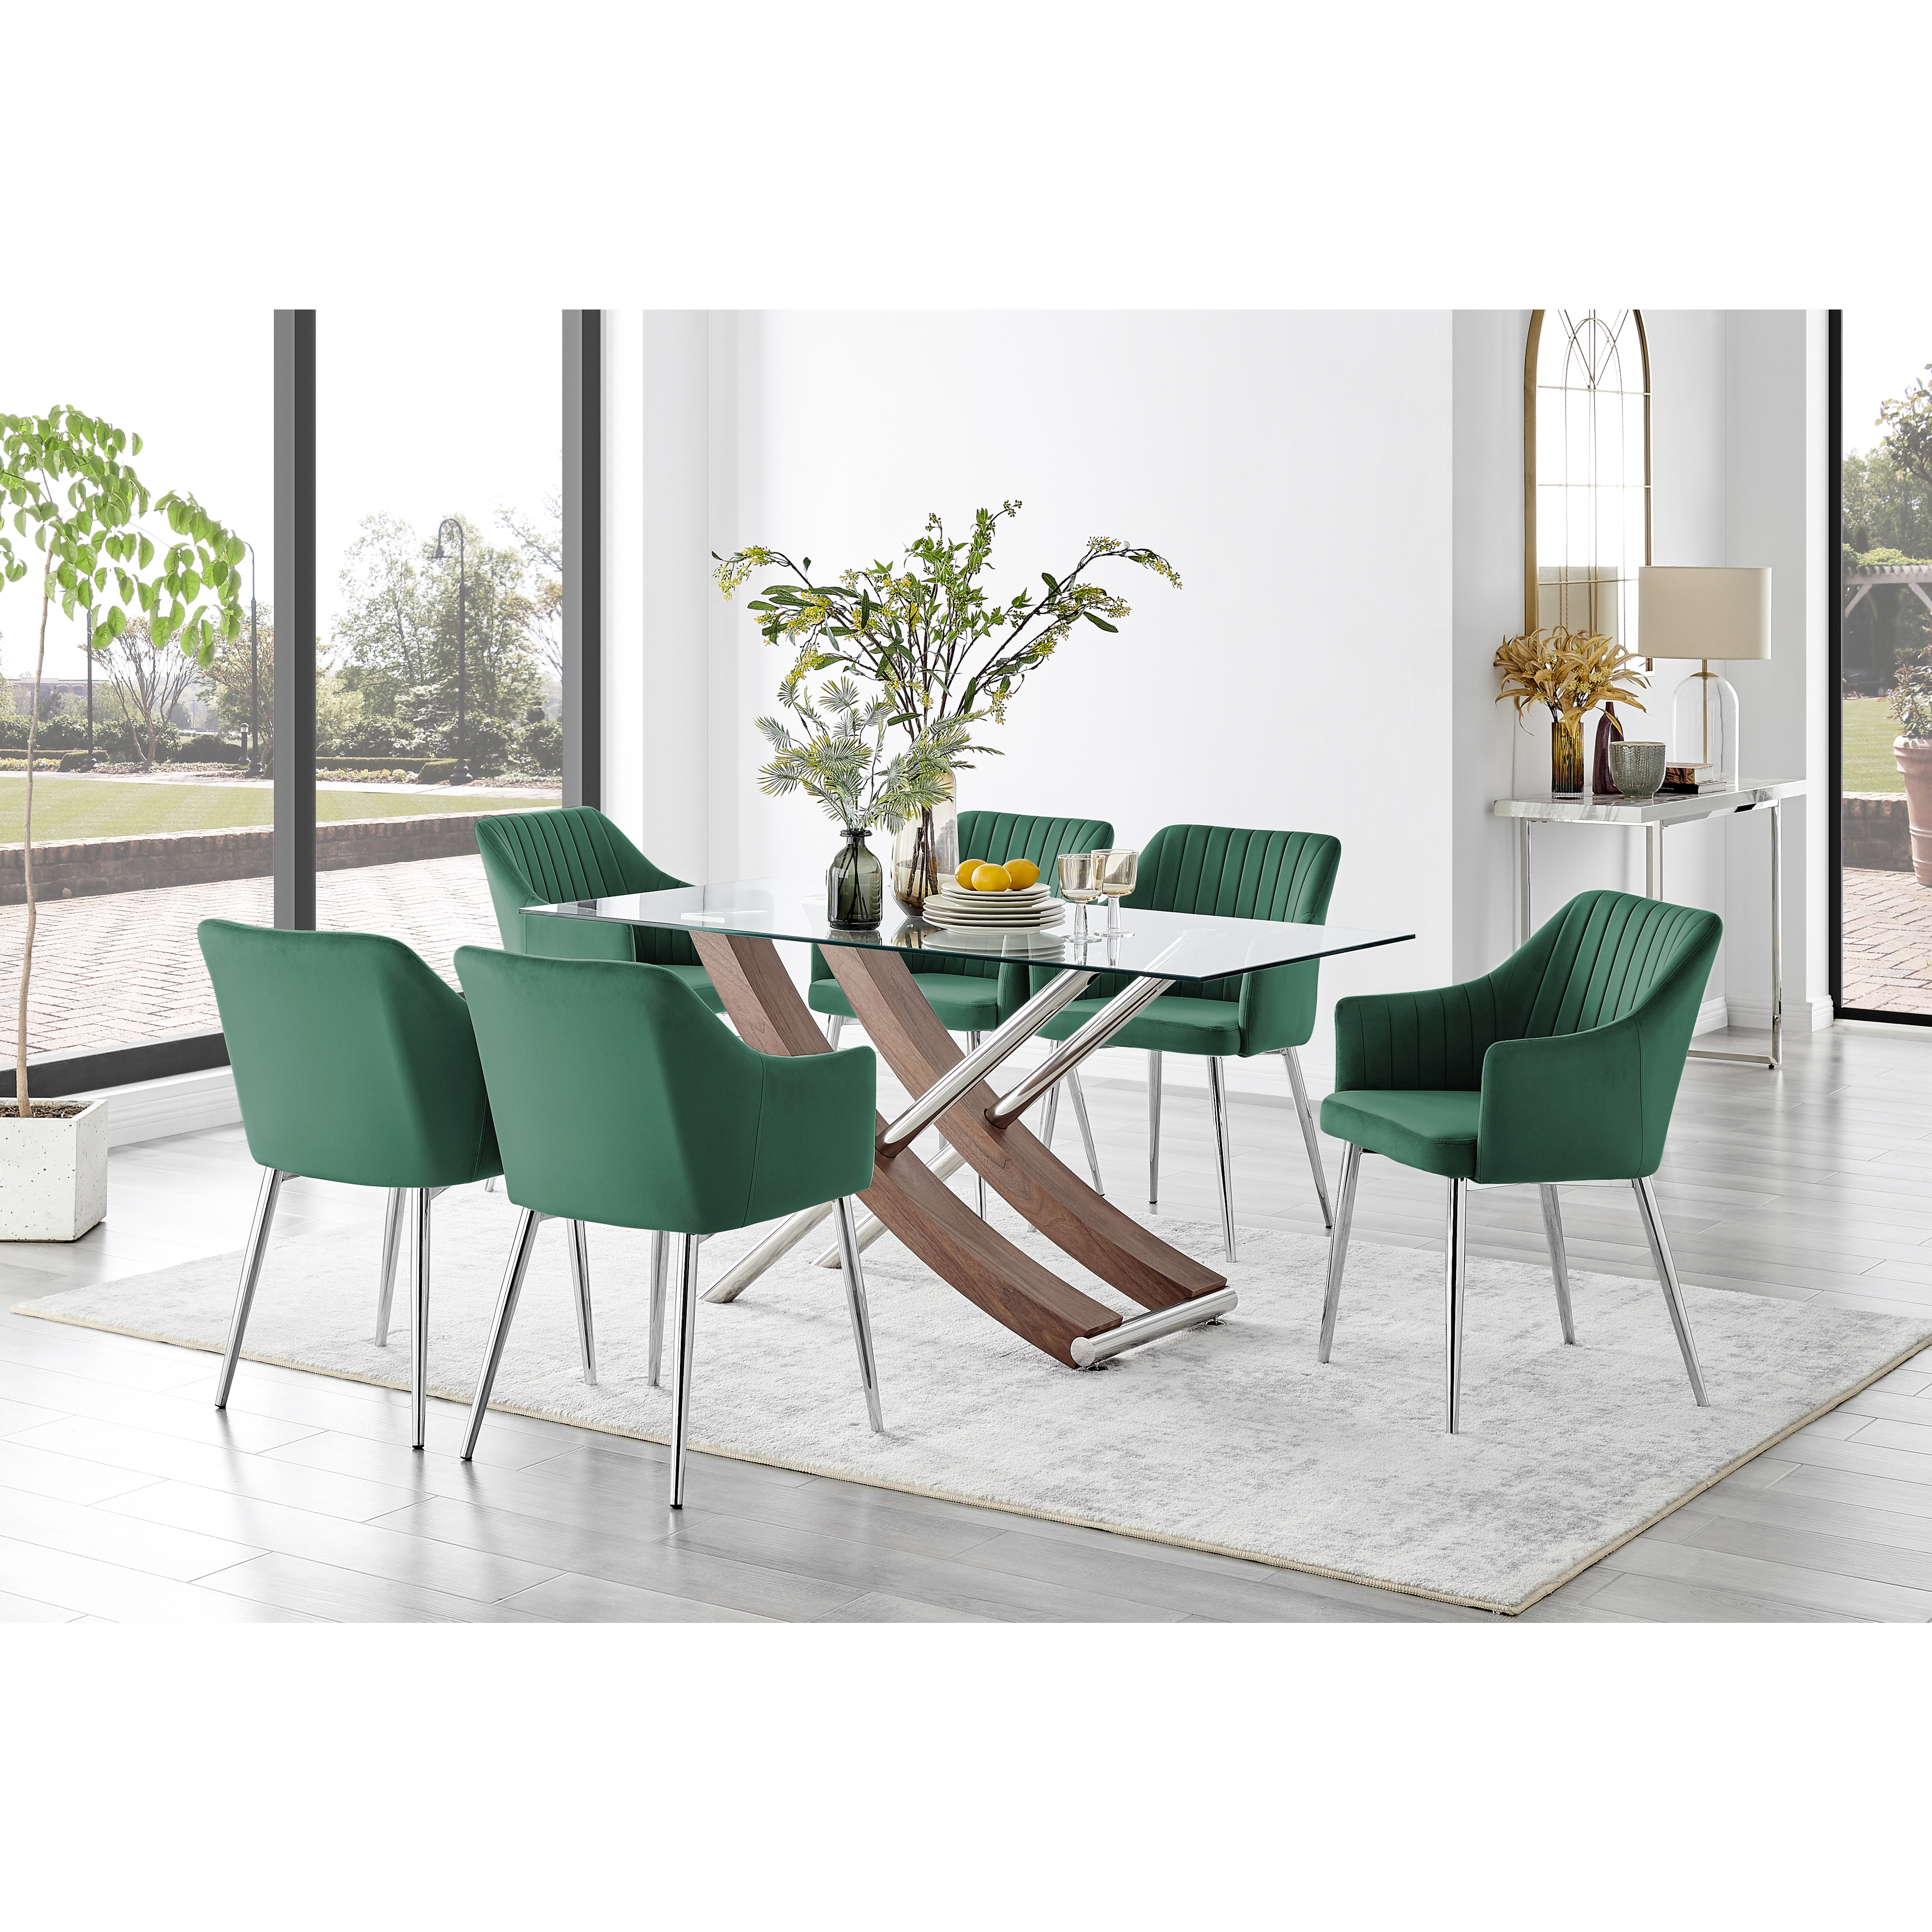 Mayfair Glass & Brown Wood Effect Dining Table & 6 Calla Silver Leg Chairs